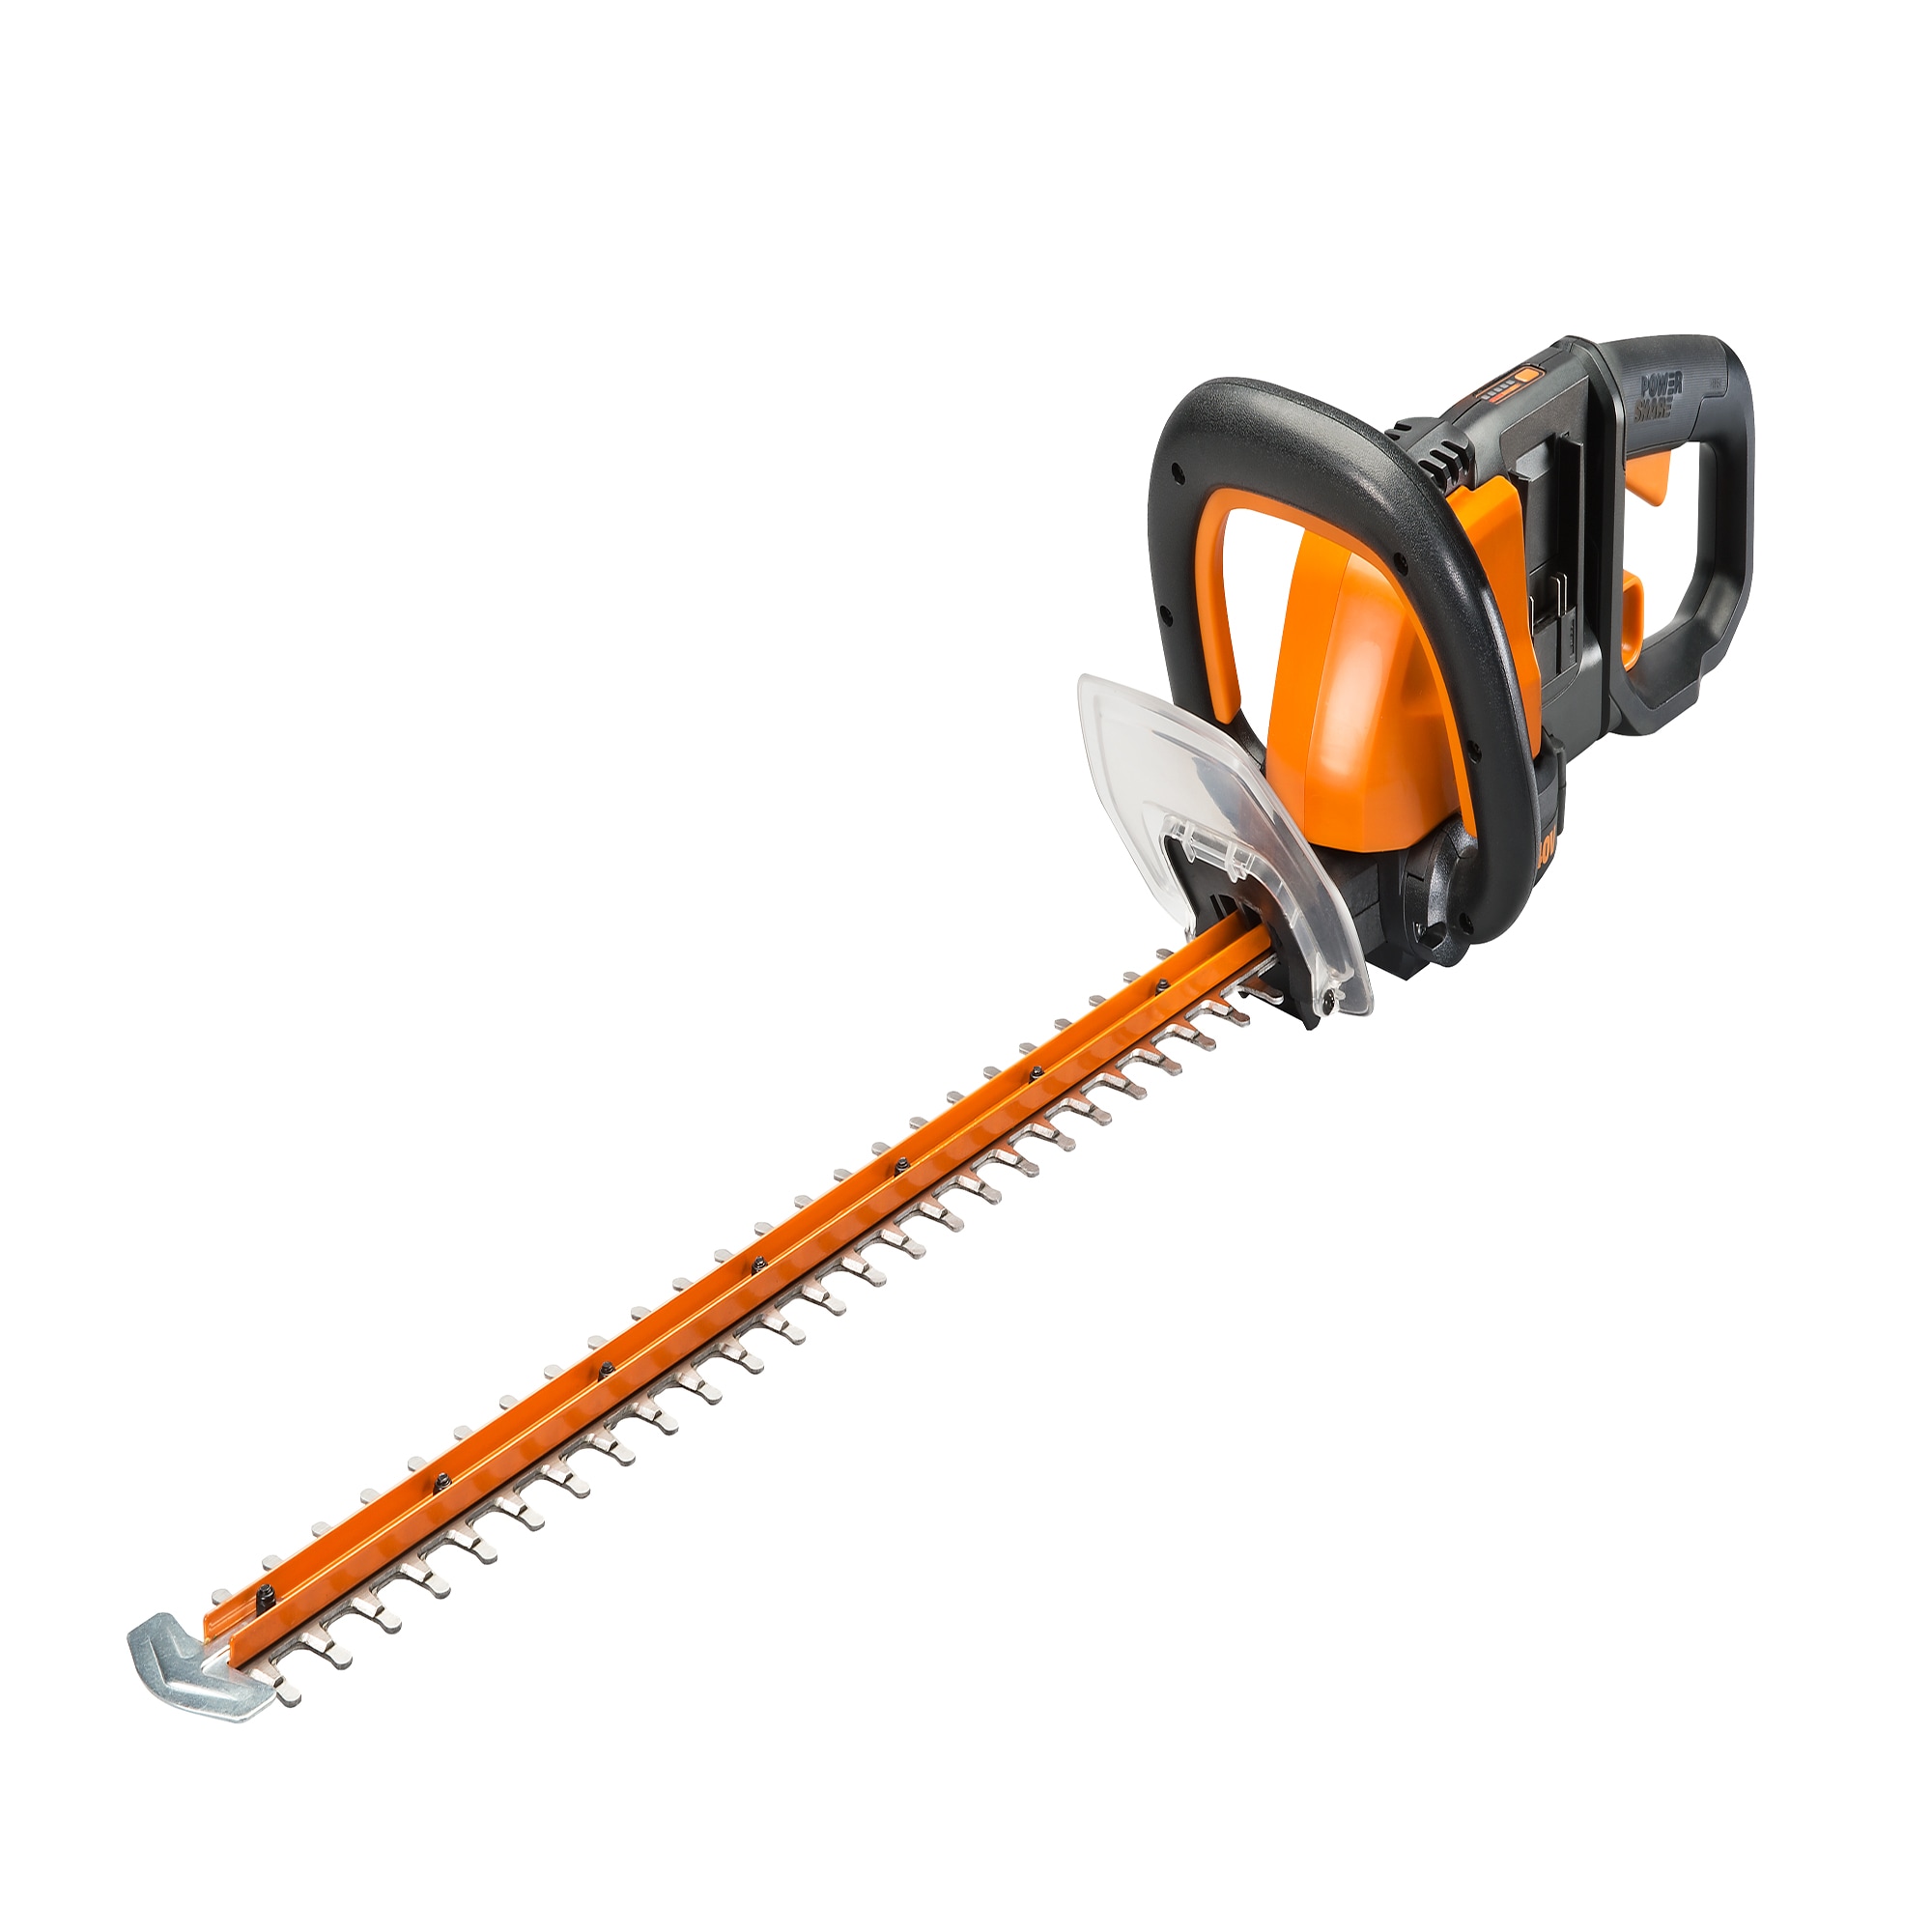 WEN 40415 40V Max Lithium-Ion 24 Cordless Hedge Trimmer with 2Ah Battery and Charger